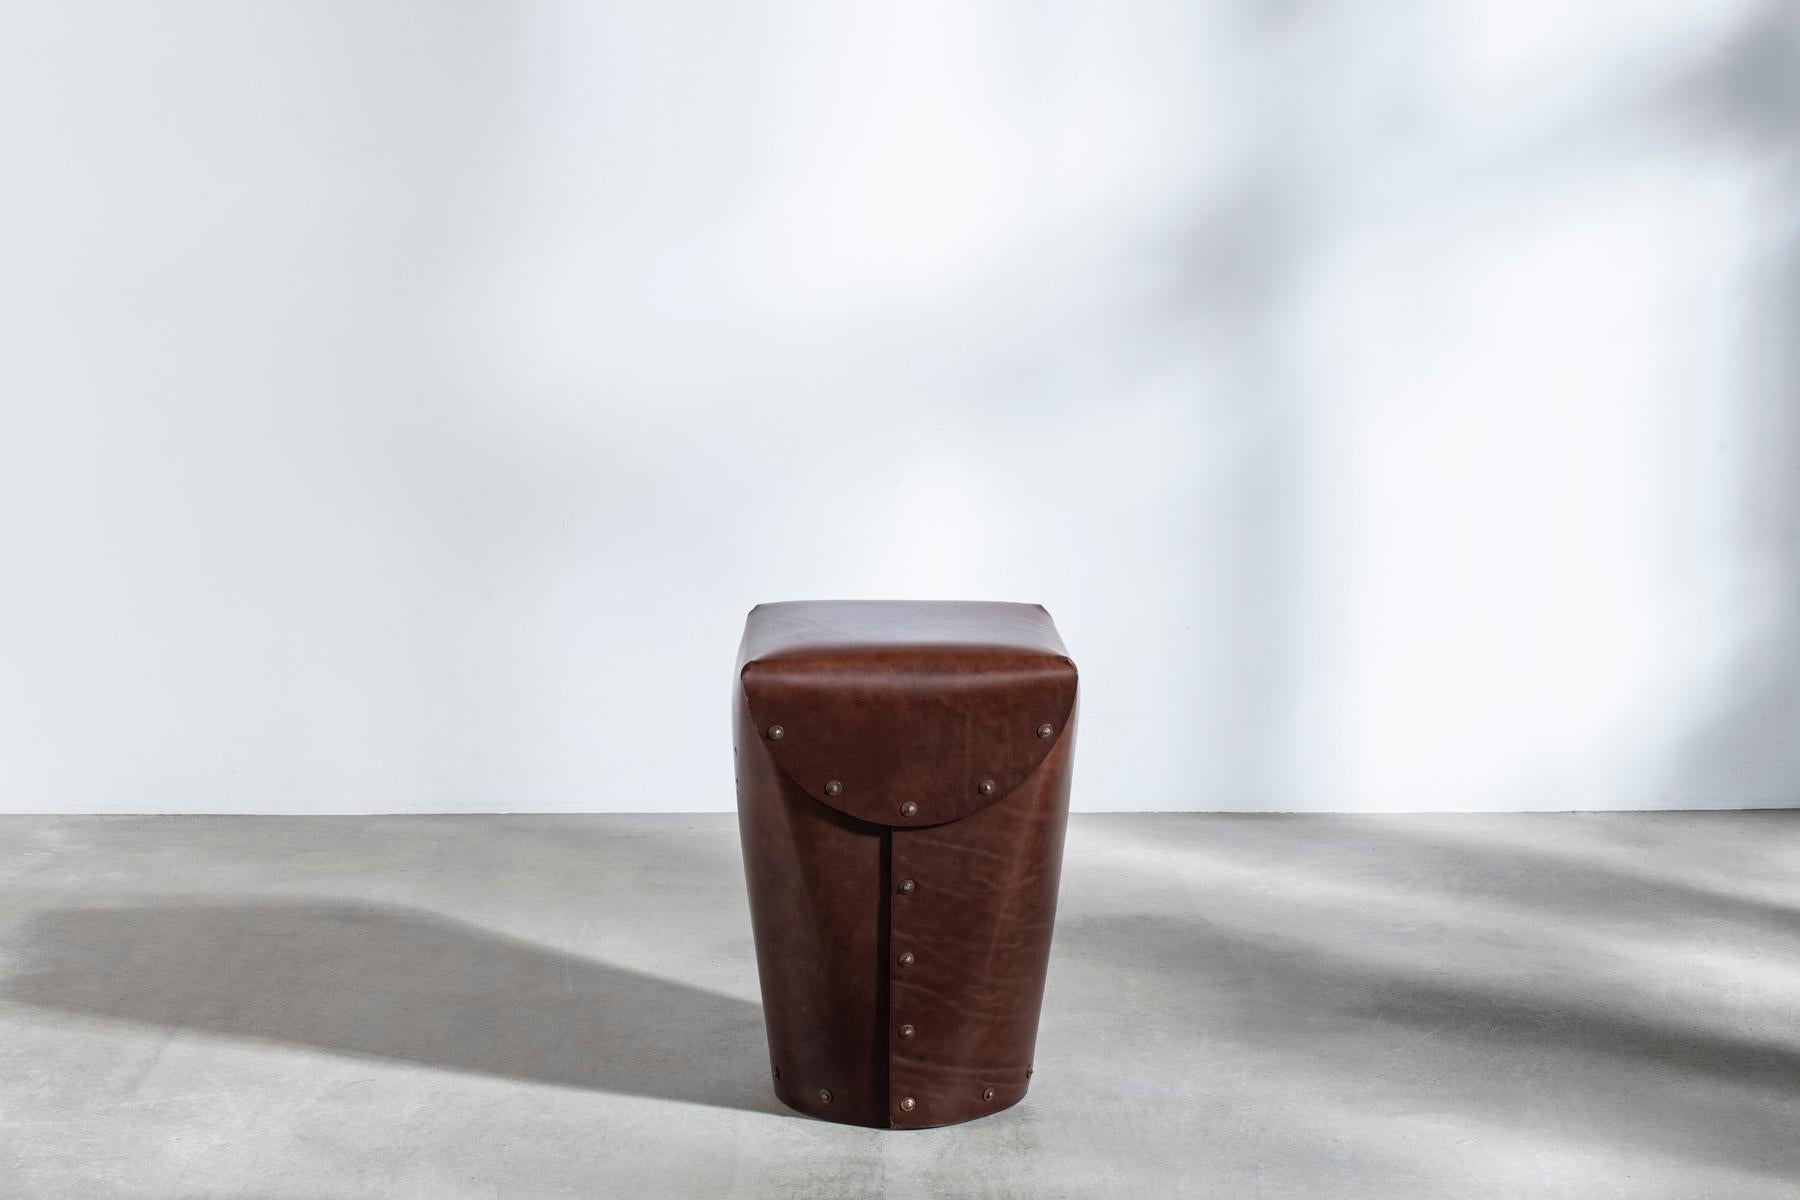 Modern Rivet Stool II by Bill Amberg, bridle leather stool with hand-set copper rivets For Sale